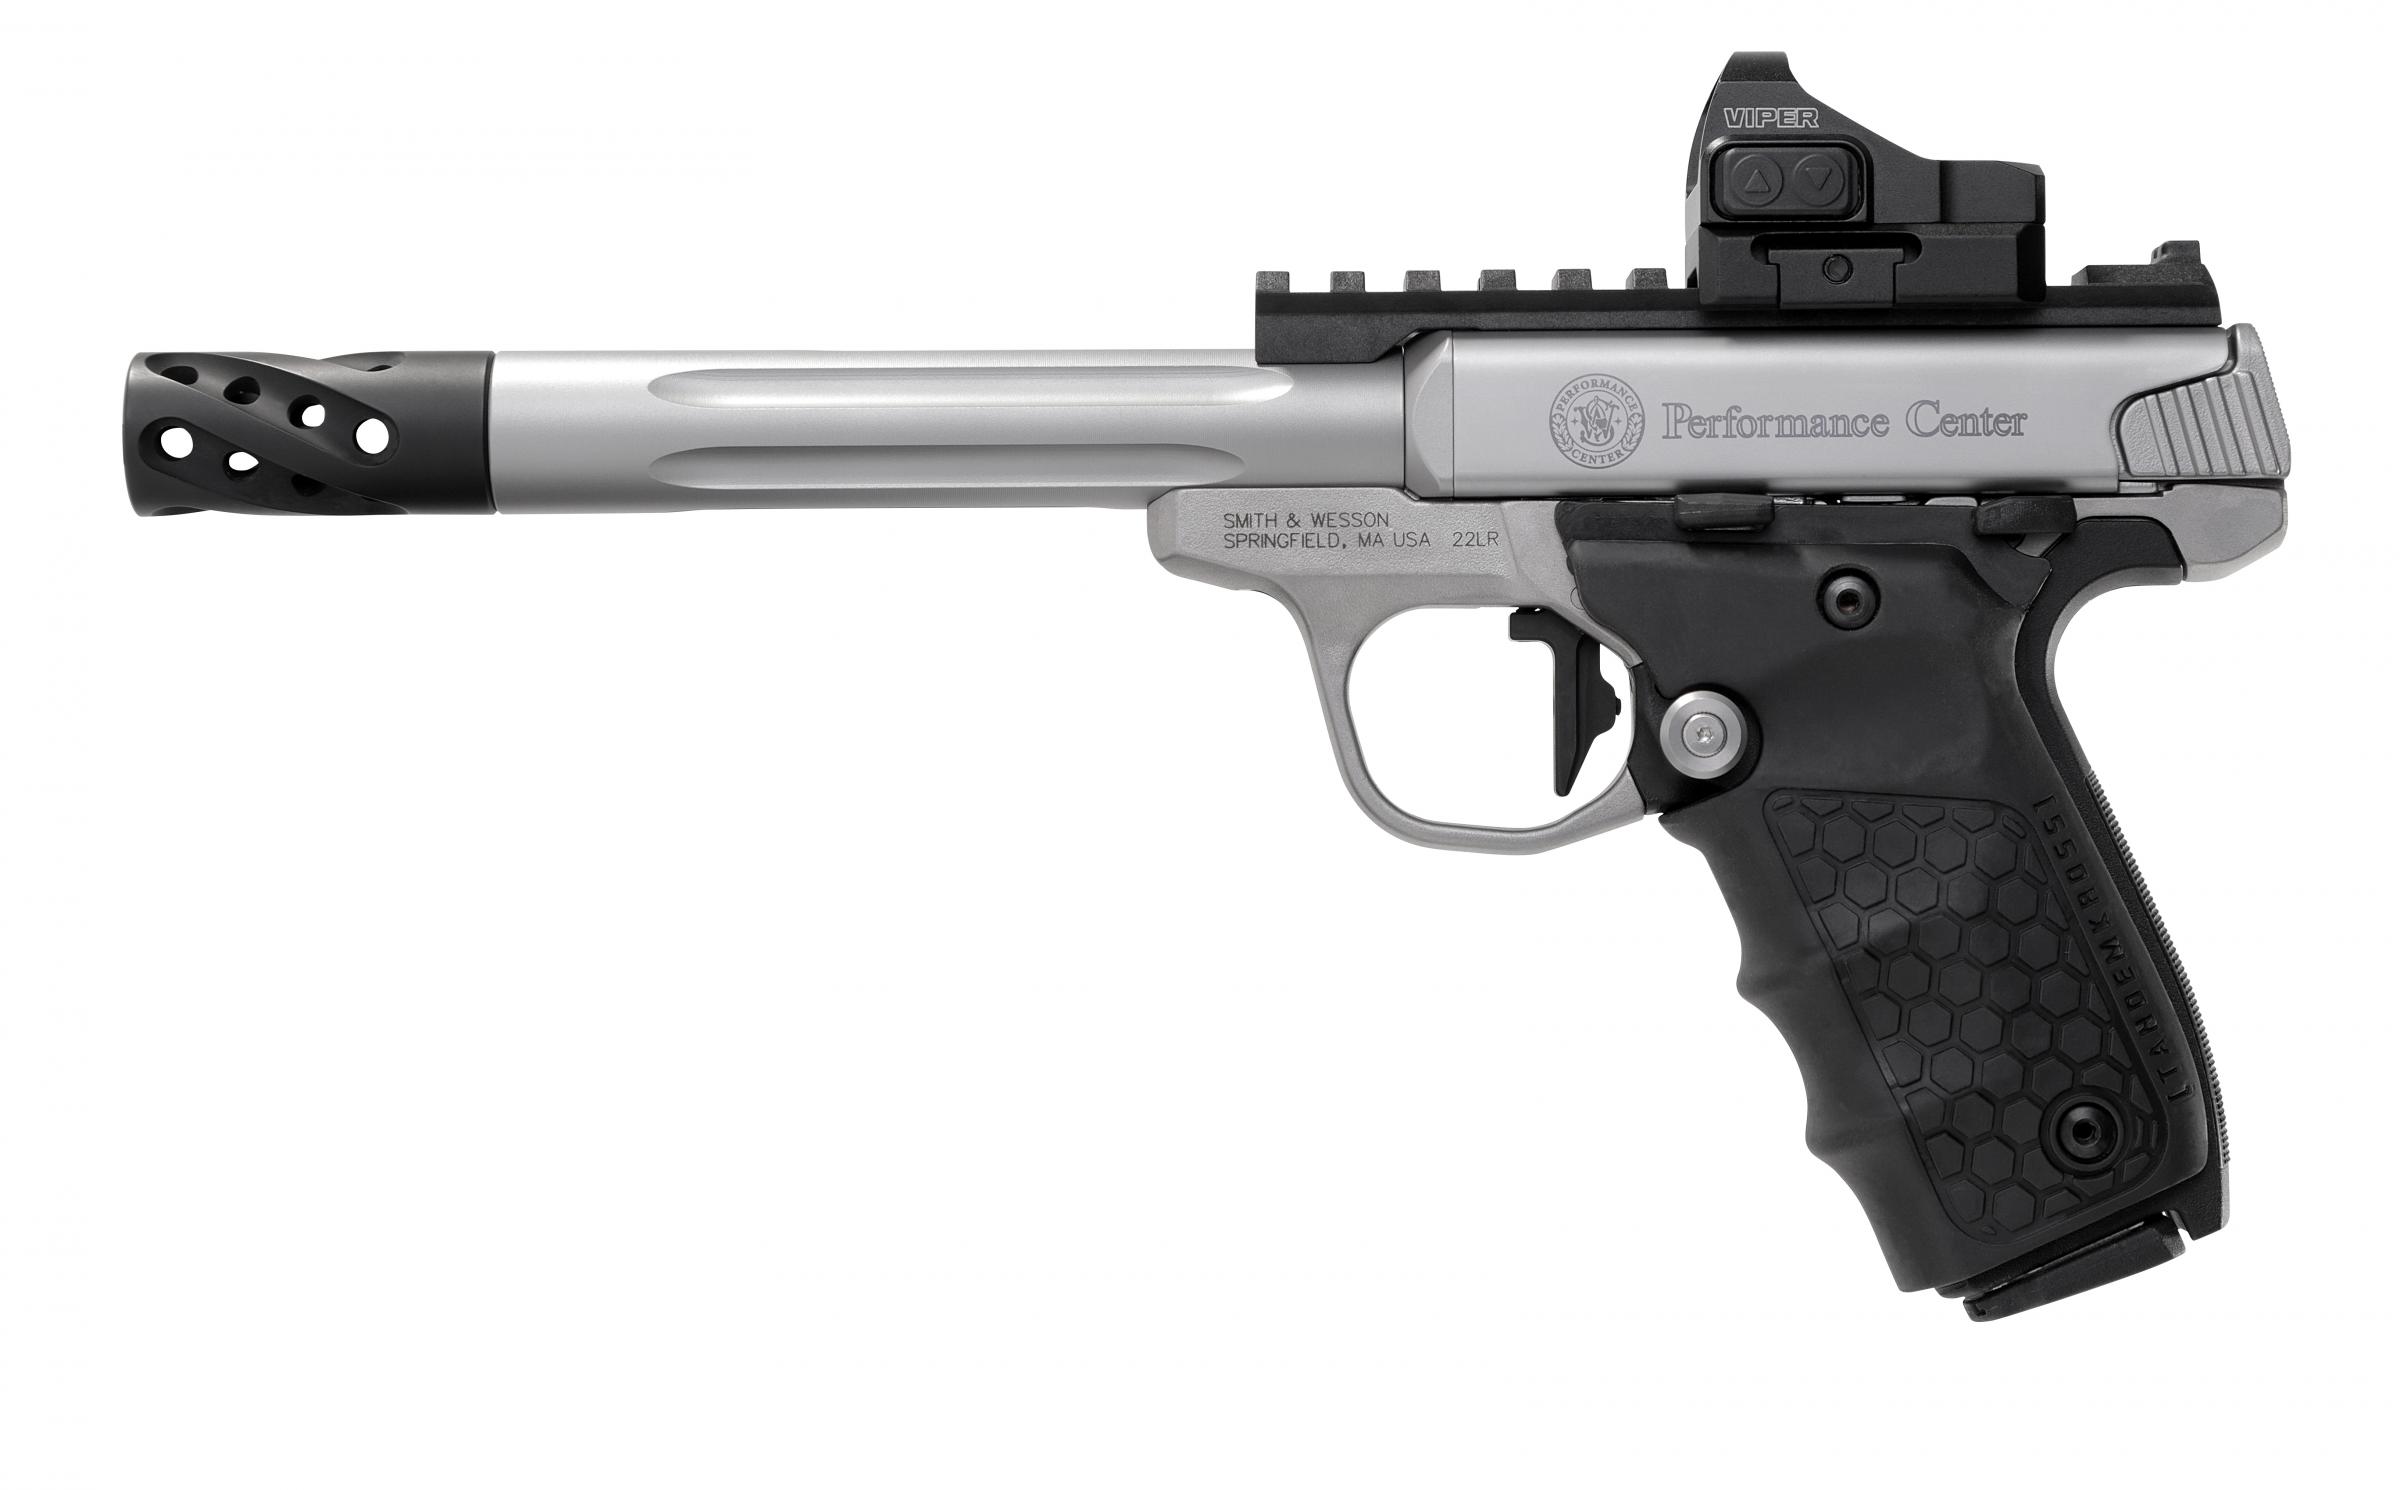 Smith and Wesson SW22 Victory Target 22 LR